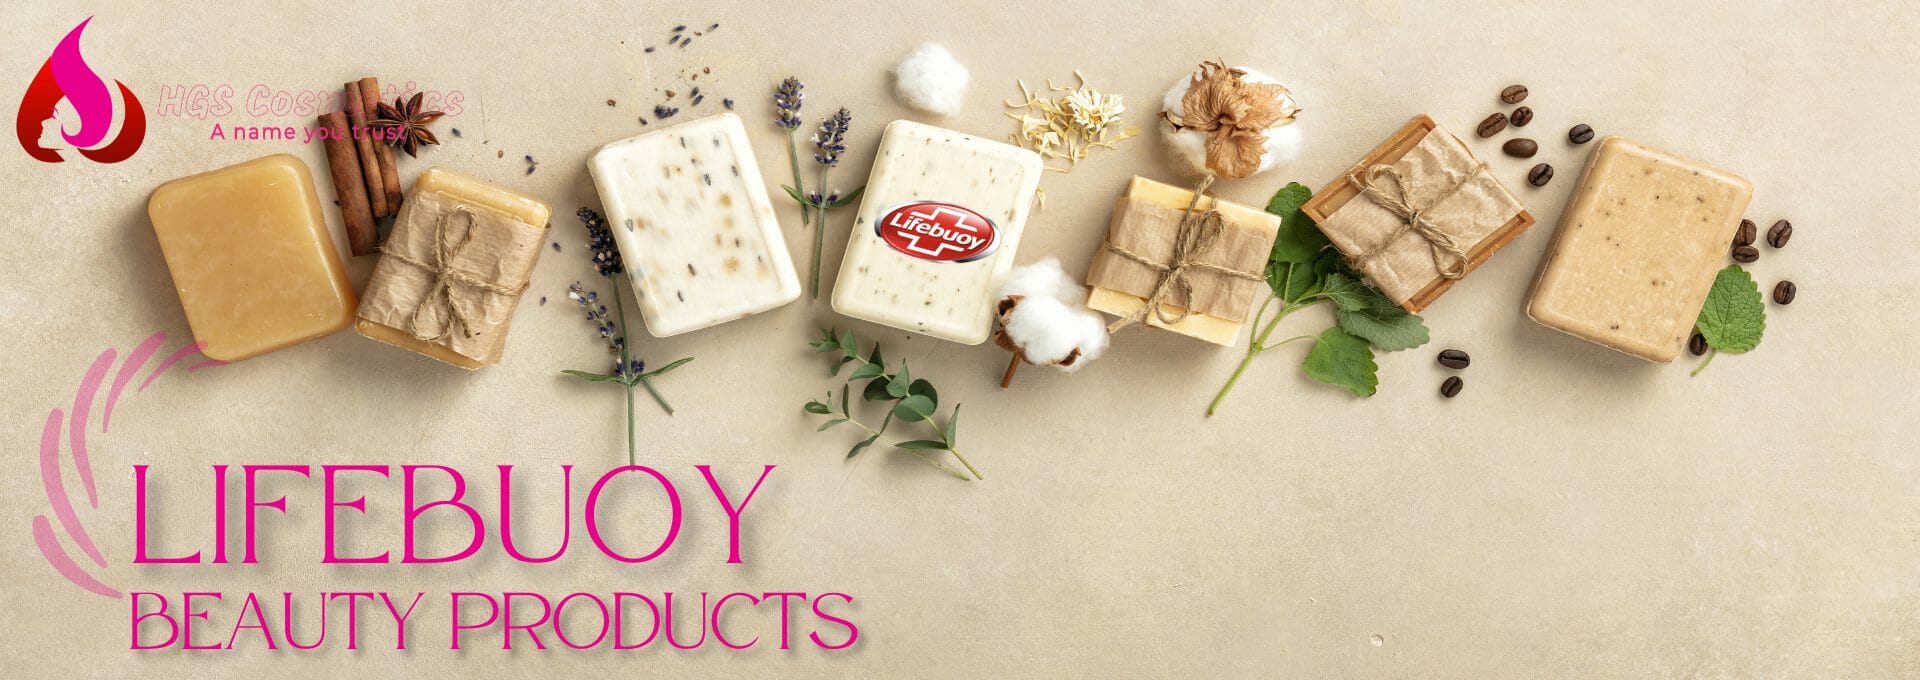 Buy Original Lifebuoy Products Online in Pakistan @ HGS Cosmetics